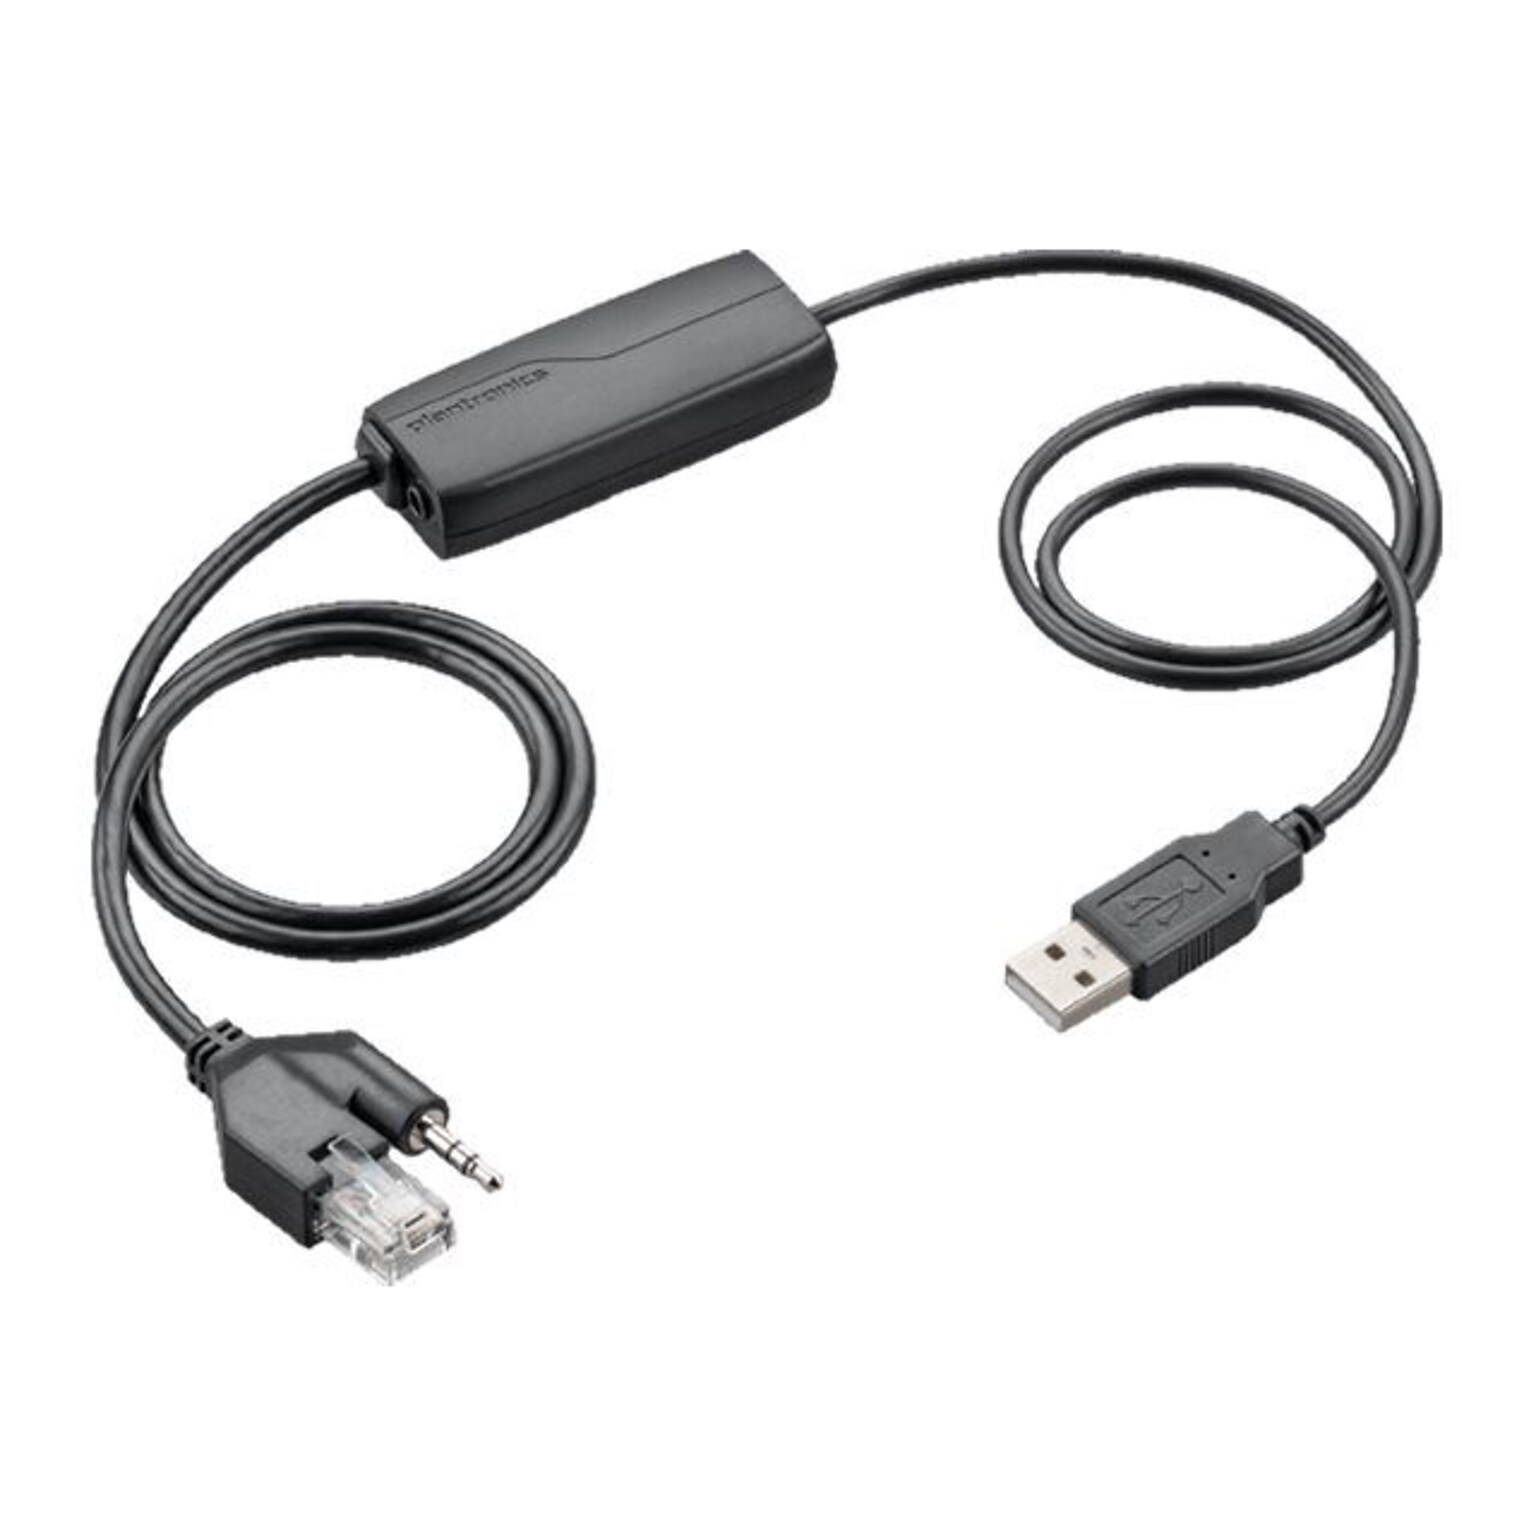 Plantronics EHS APU-72 Electronic Hook Switch Adapter Cable for Cisco Unified IP Phones; Black